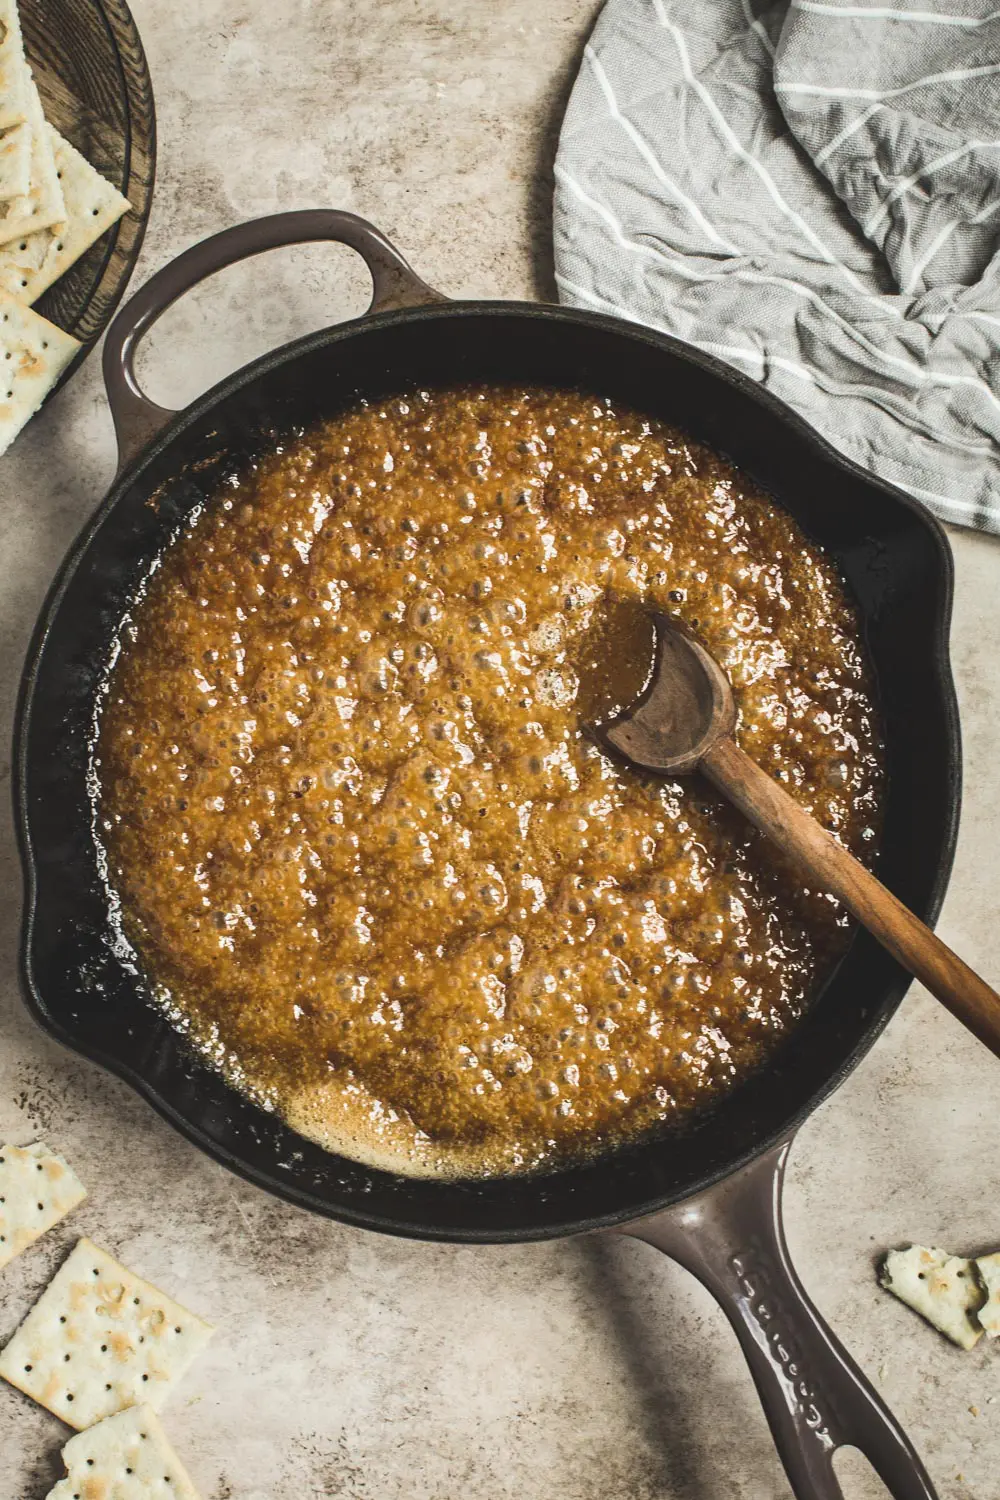 Butter and brown sugar mixture in an iron skillet with a wooden spoon.